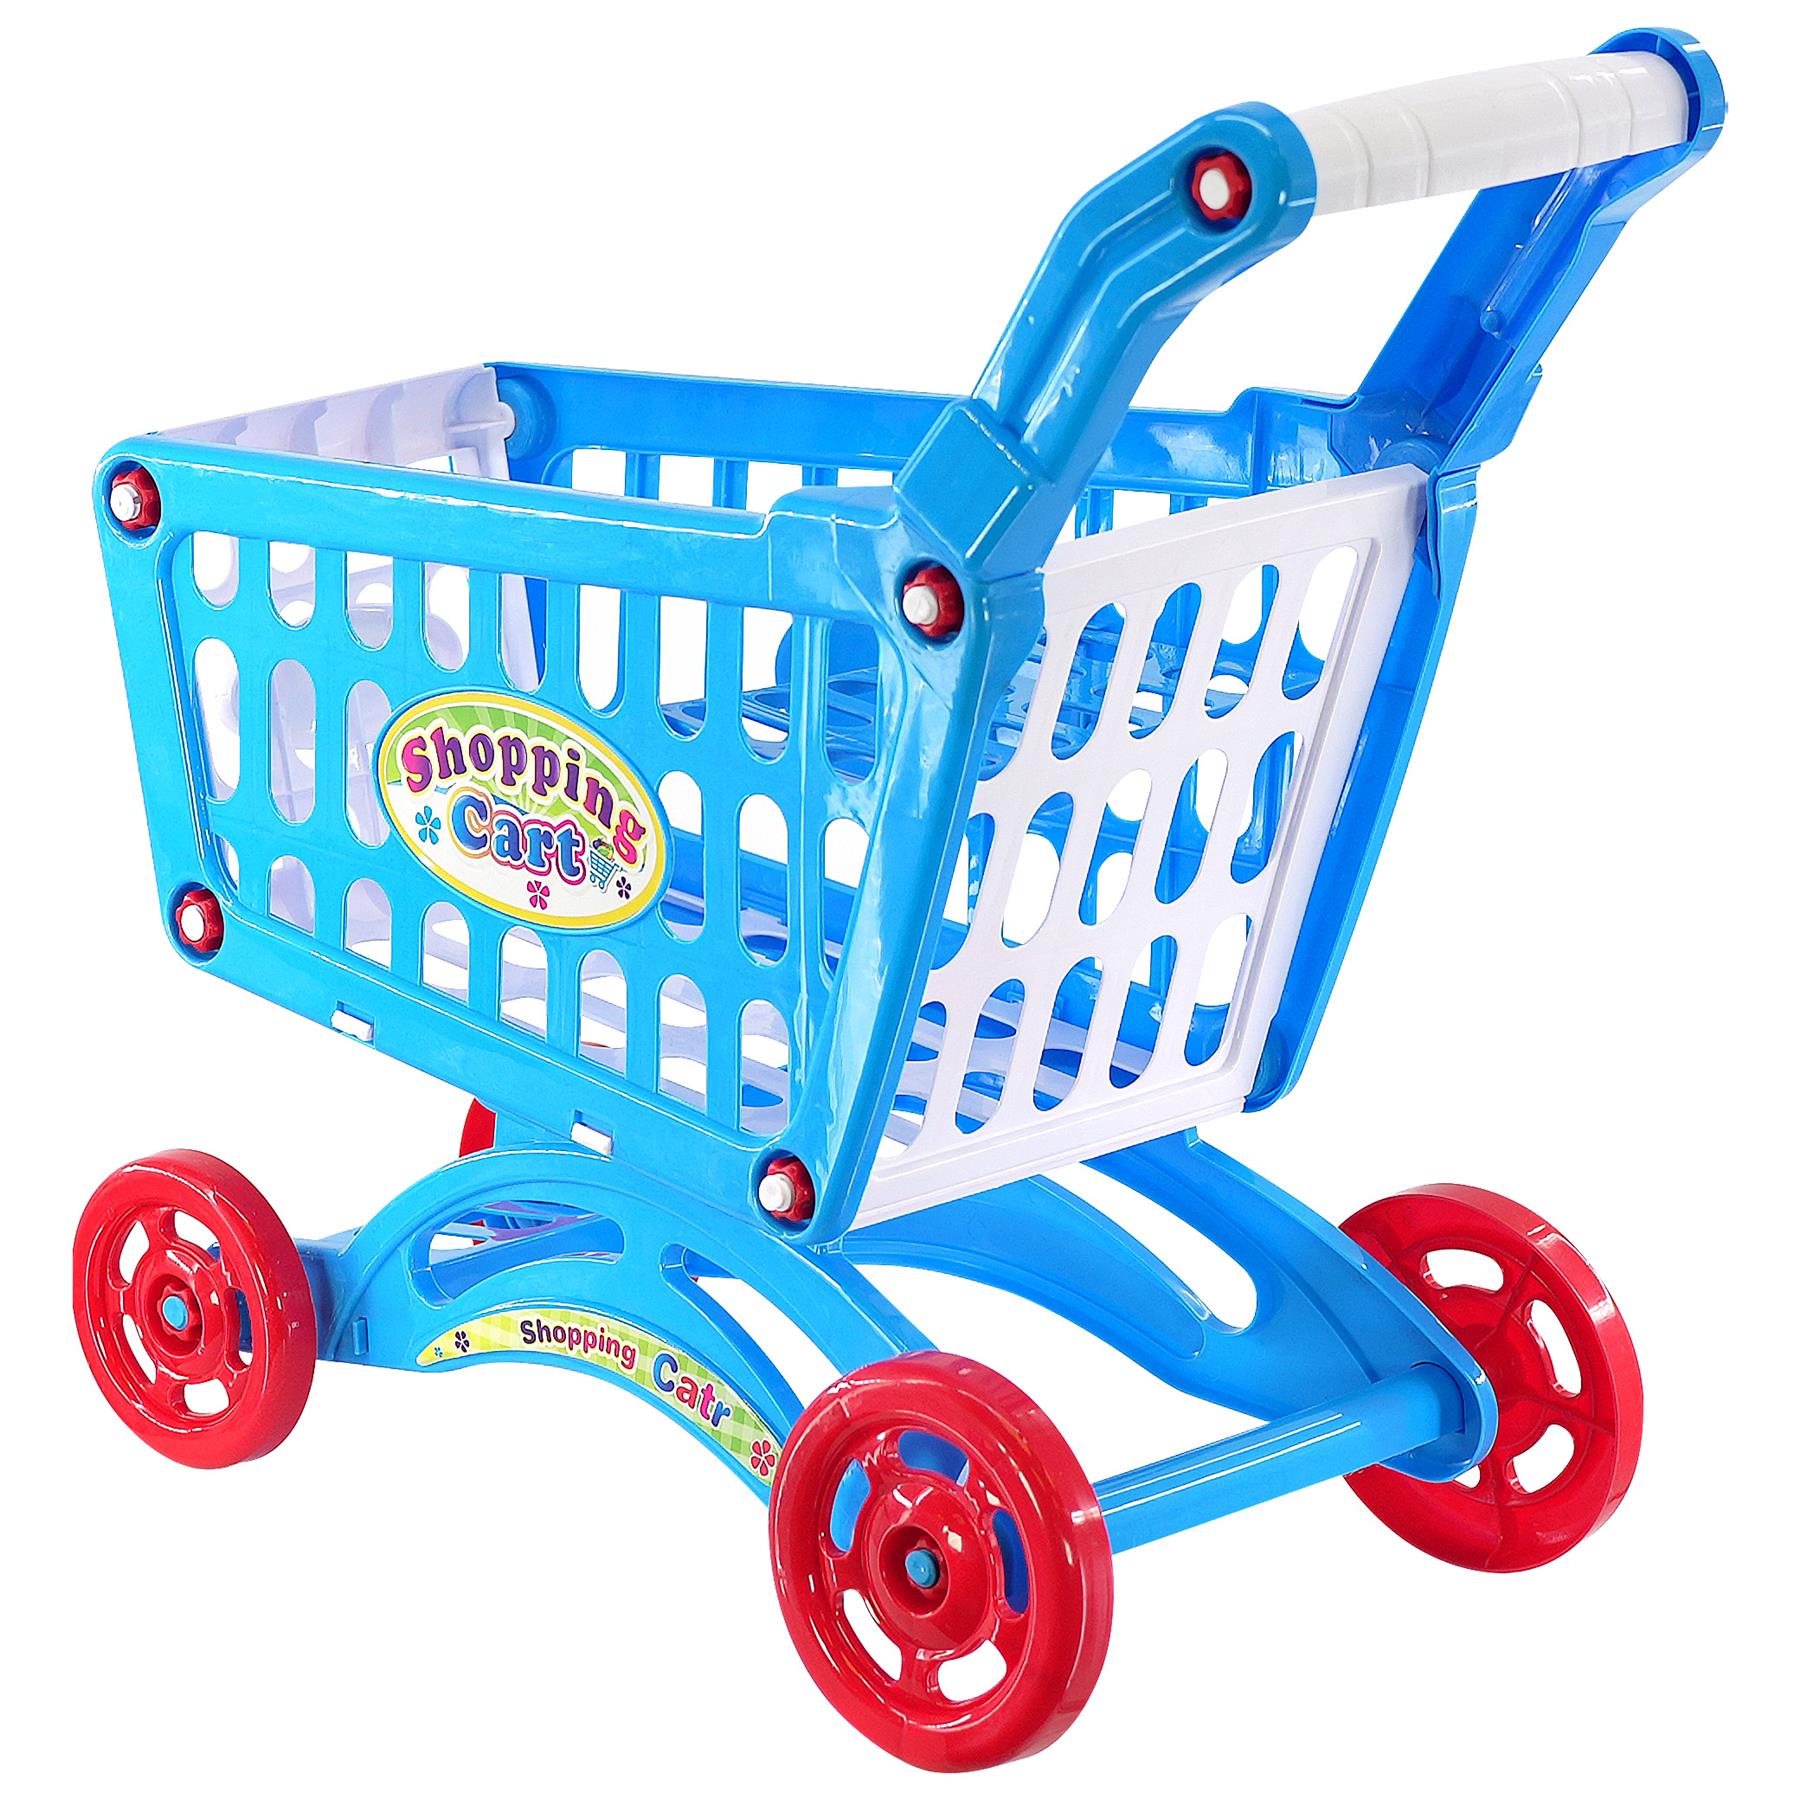 The Magic Toy Shop Activity Toy Blue Shopping Trolley Cart Play Food Set